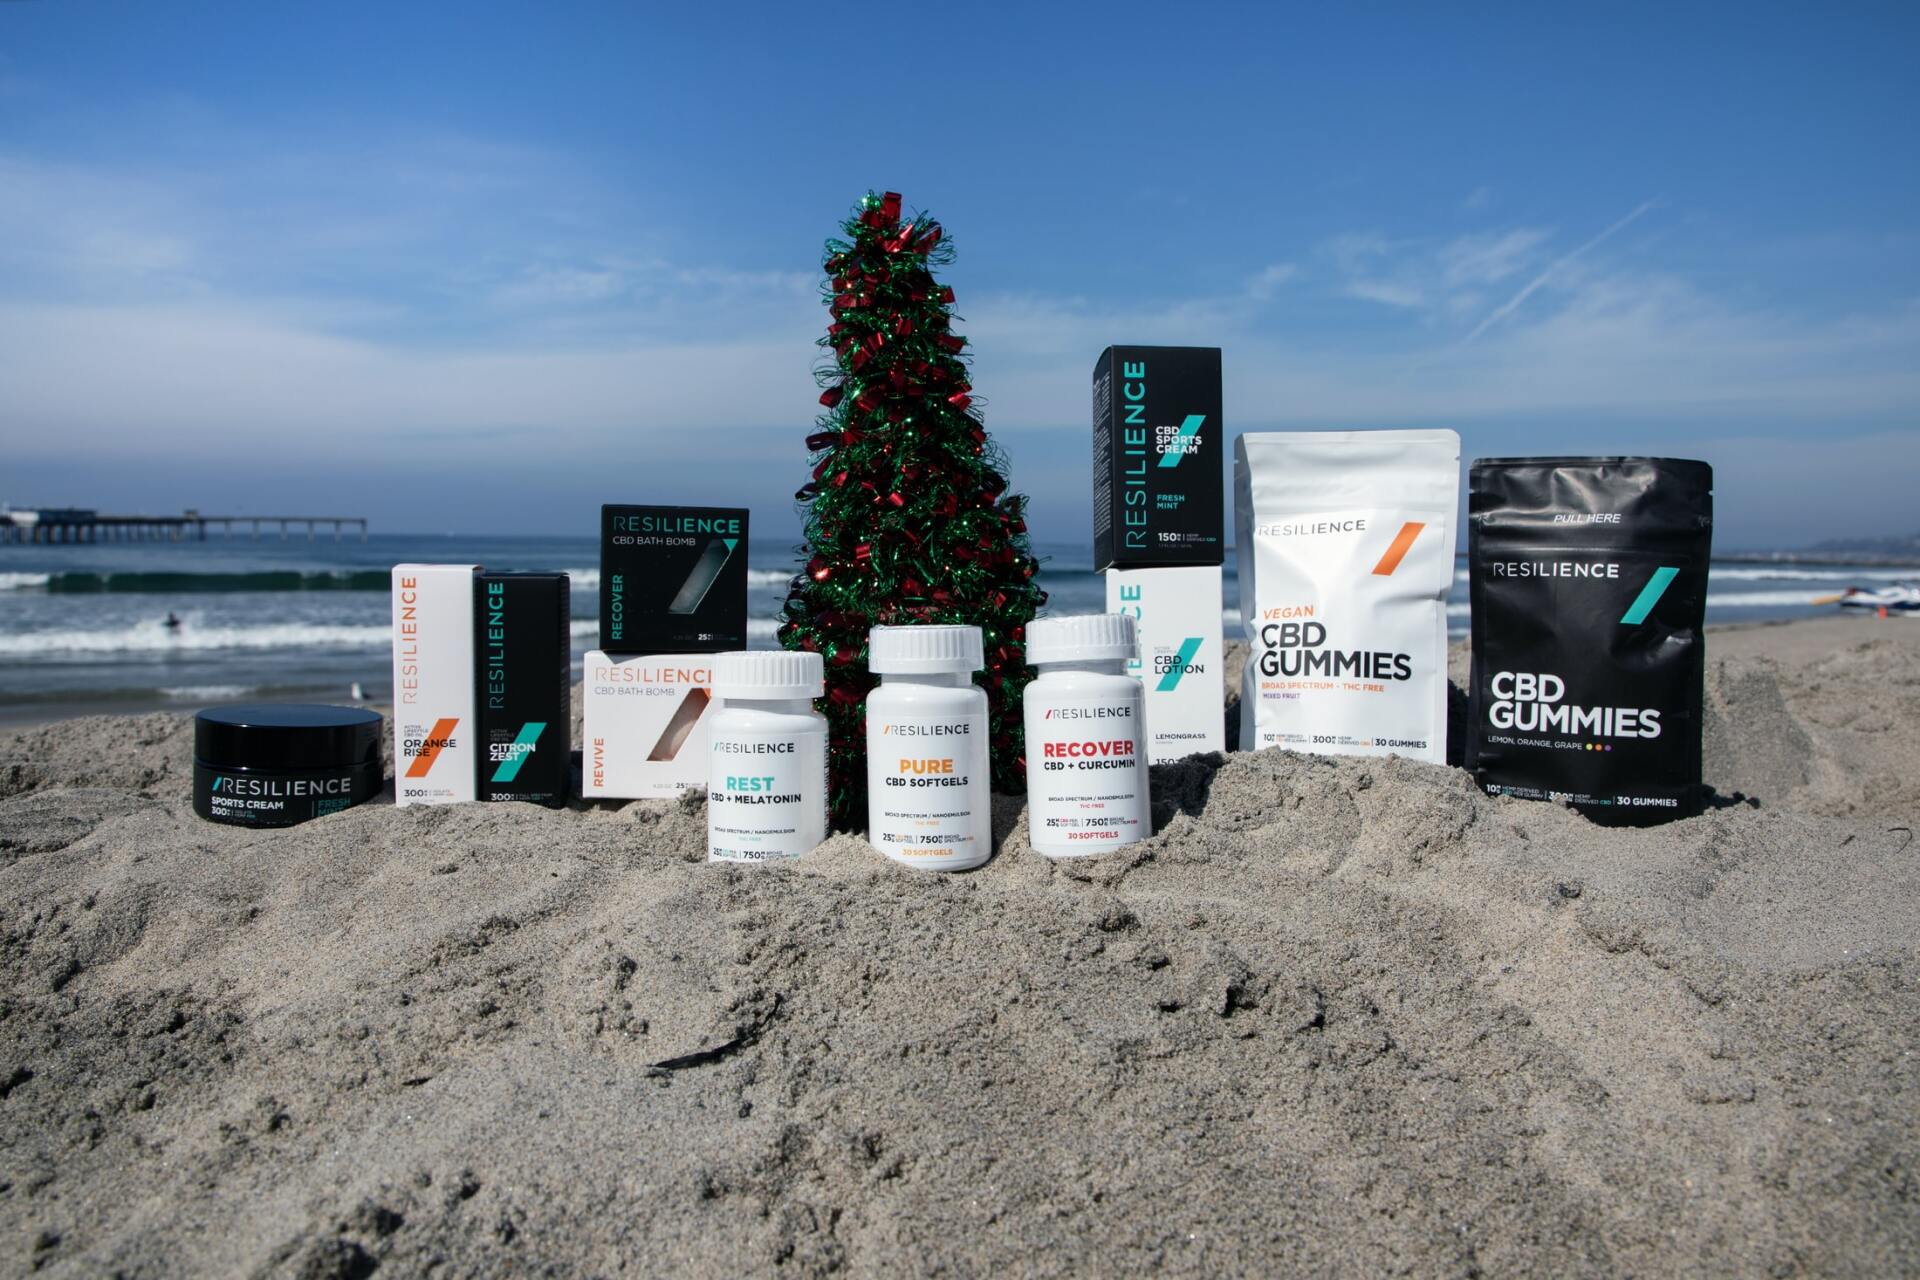 CBD supplements in plastic bottles and bags on a beach with a Christmas tree in the background.